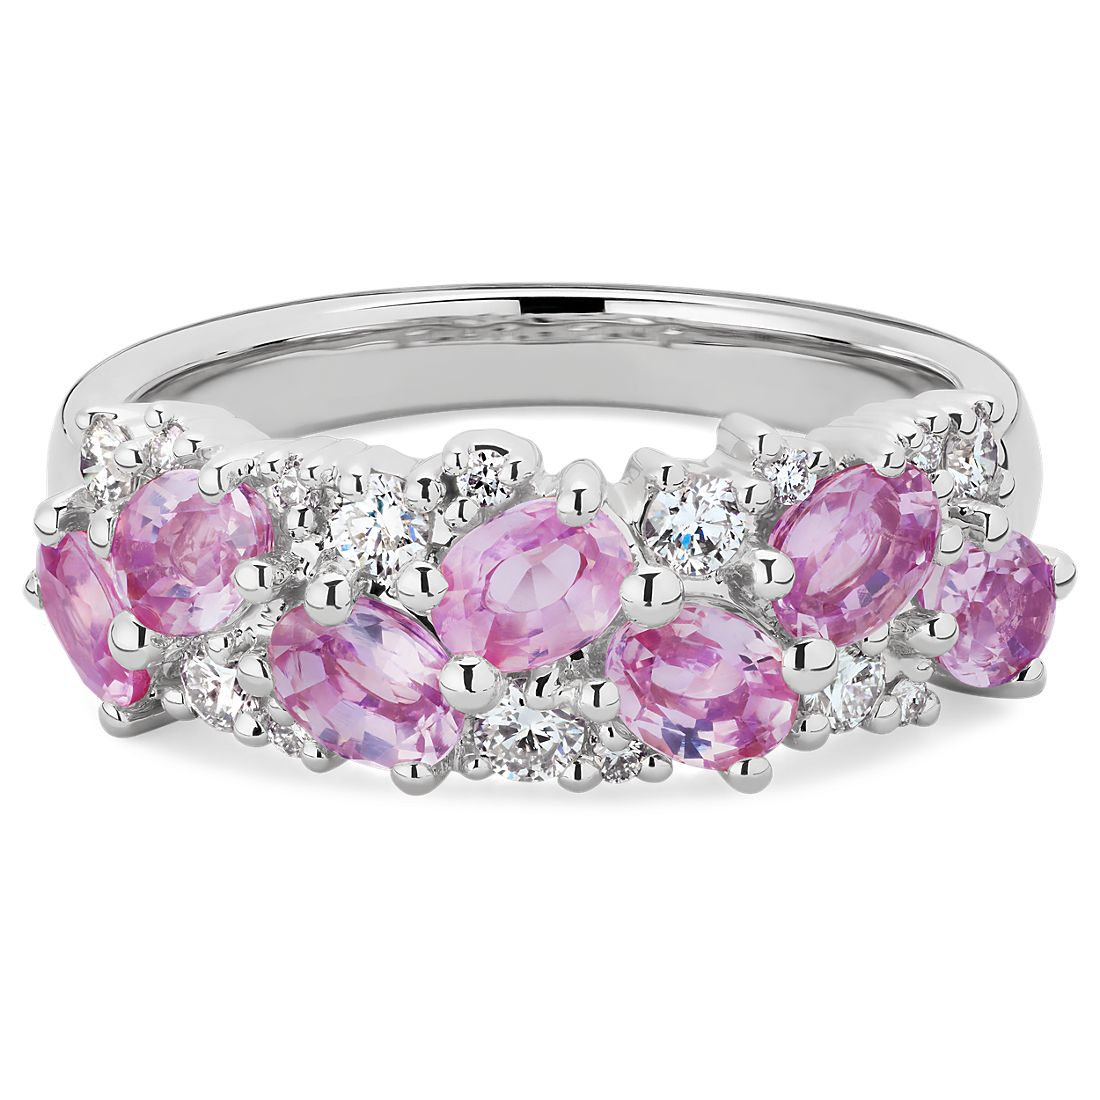 Romantic Oval Pink Sapphire and Diamond Ring in 14k White Gold (0.23 ct. tw.)